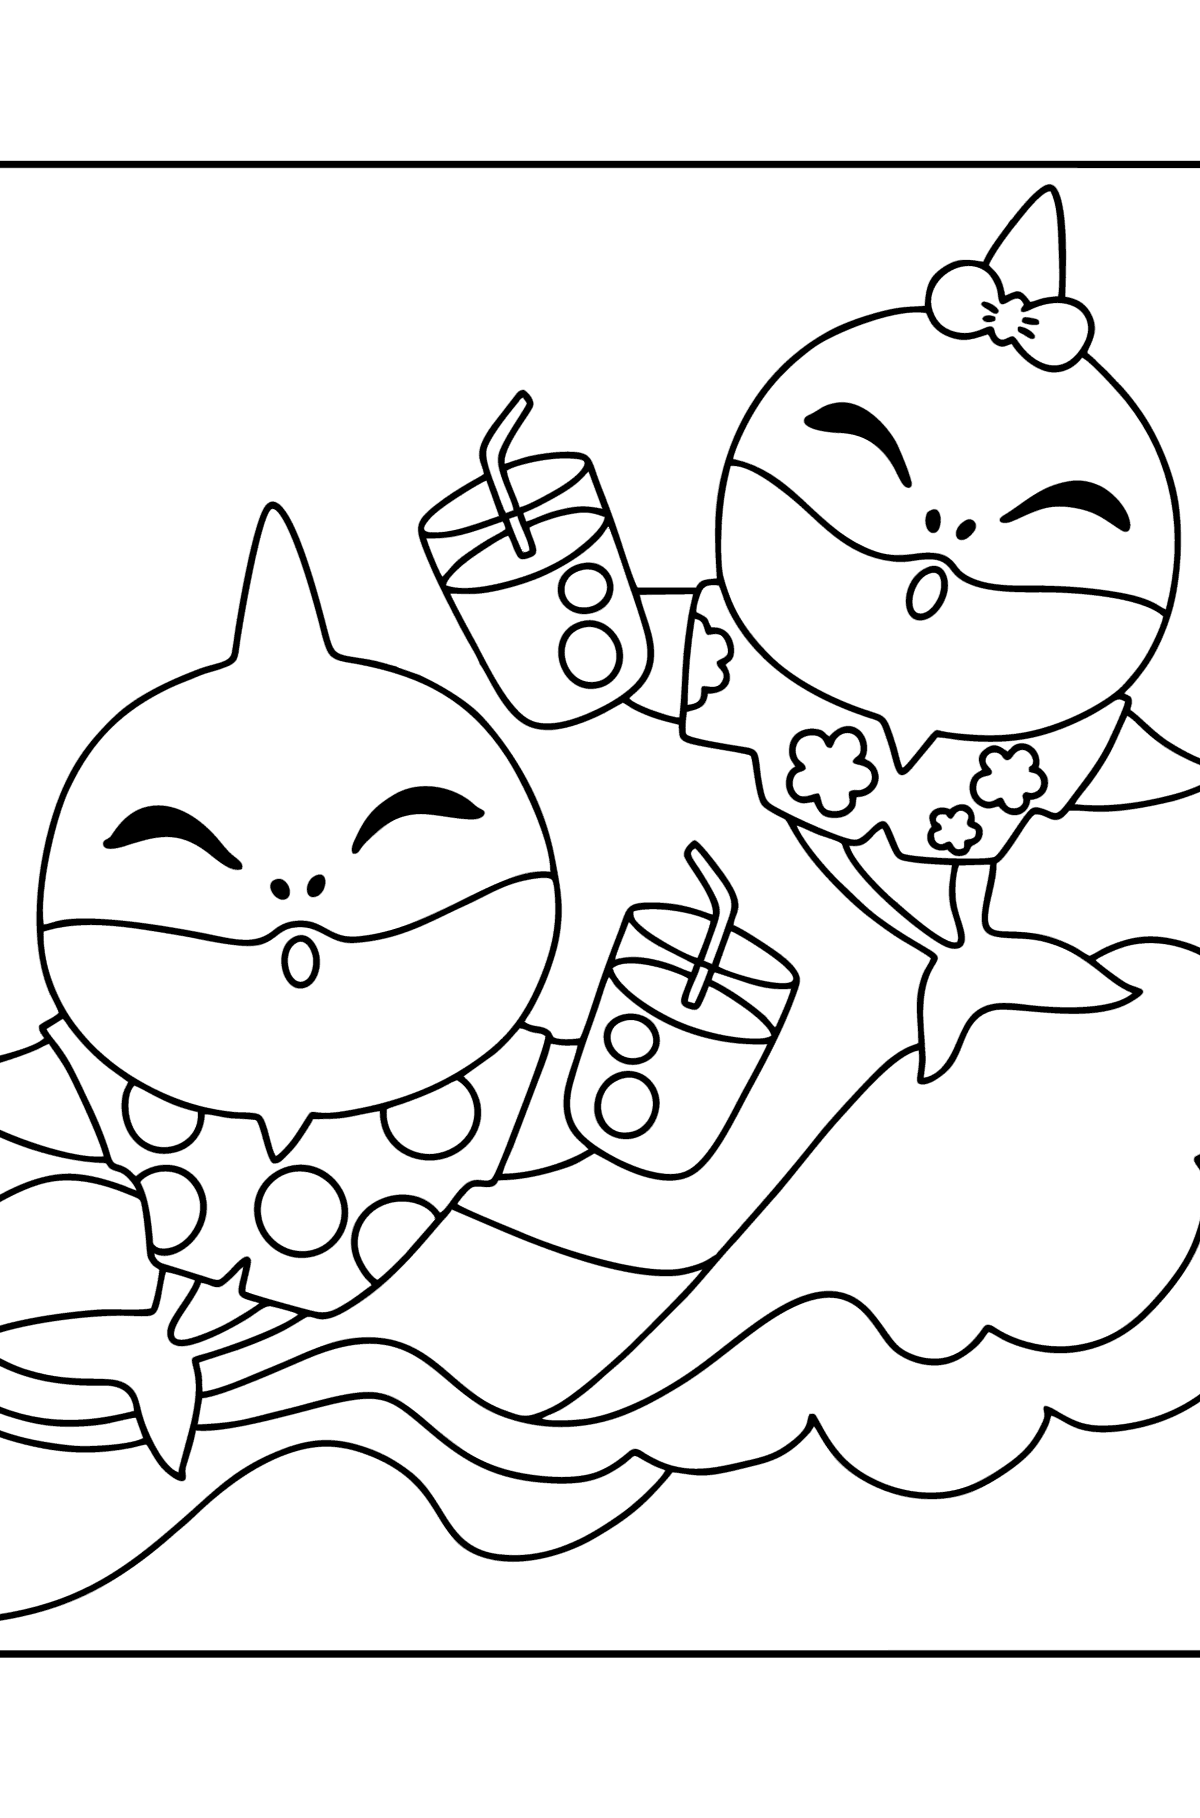 Baby shark Mommy and daddy coloring page - Coloring Pages for Kids